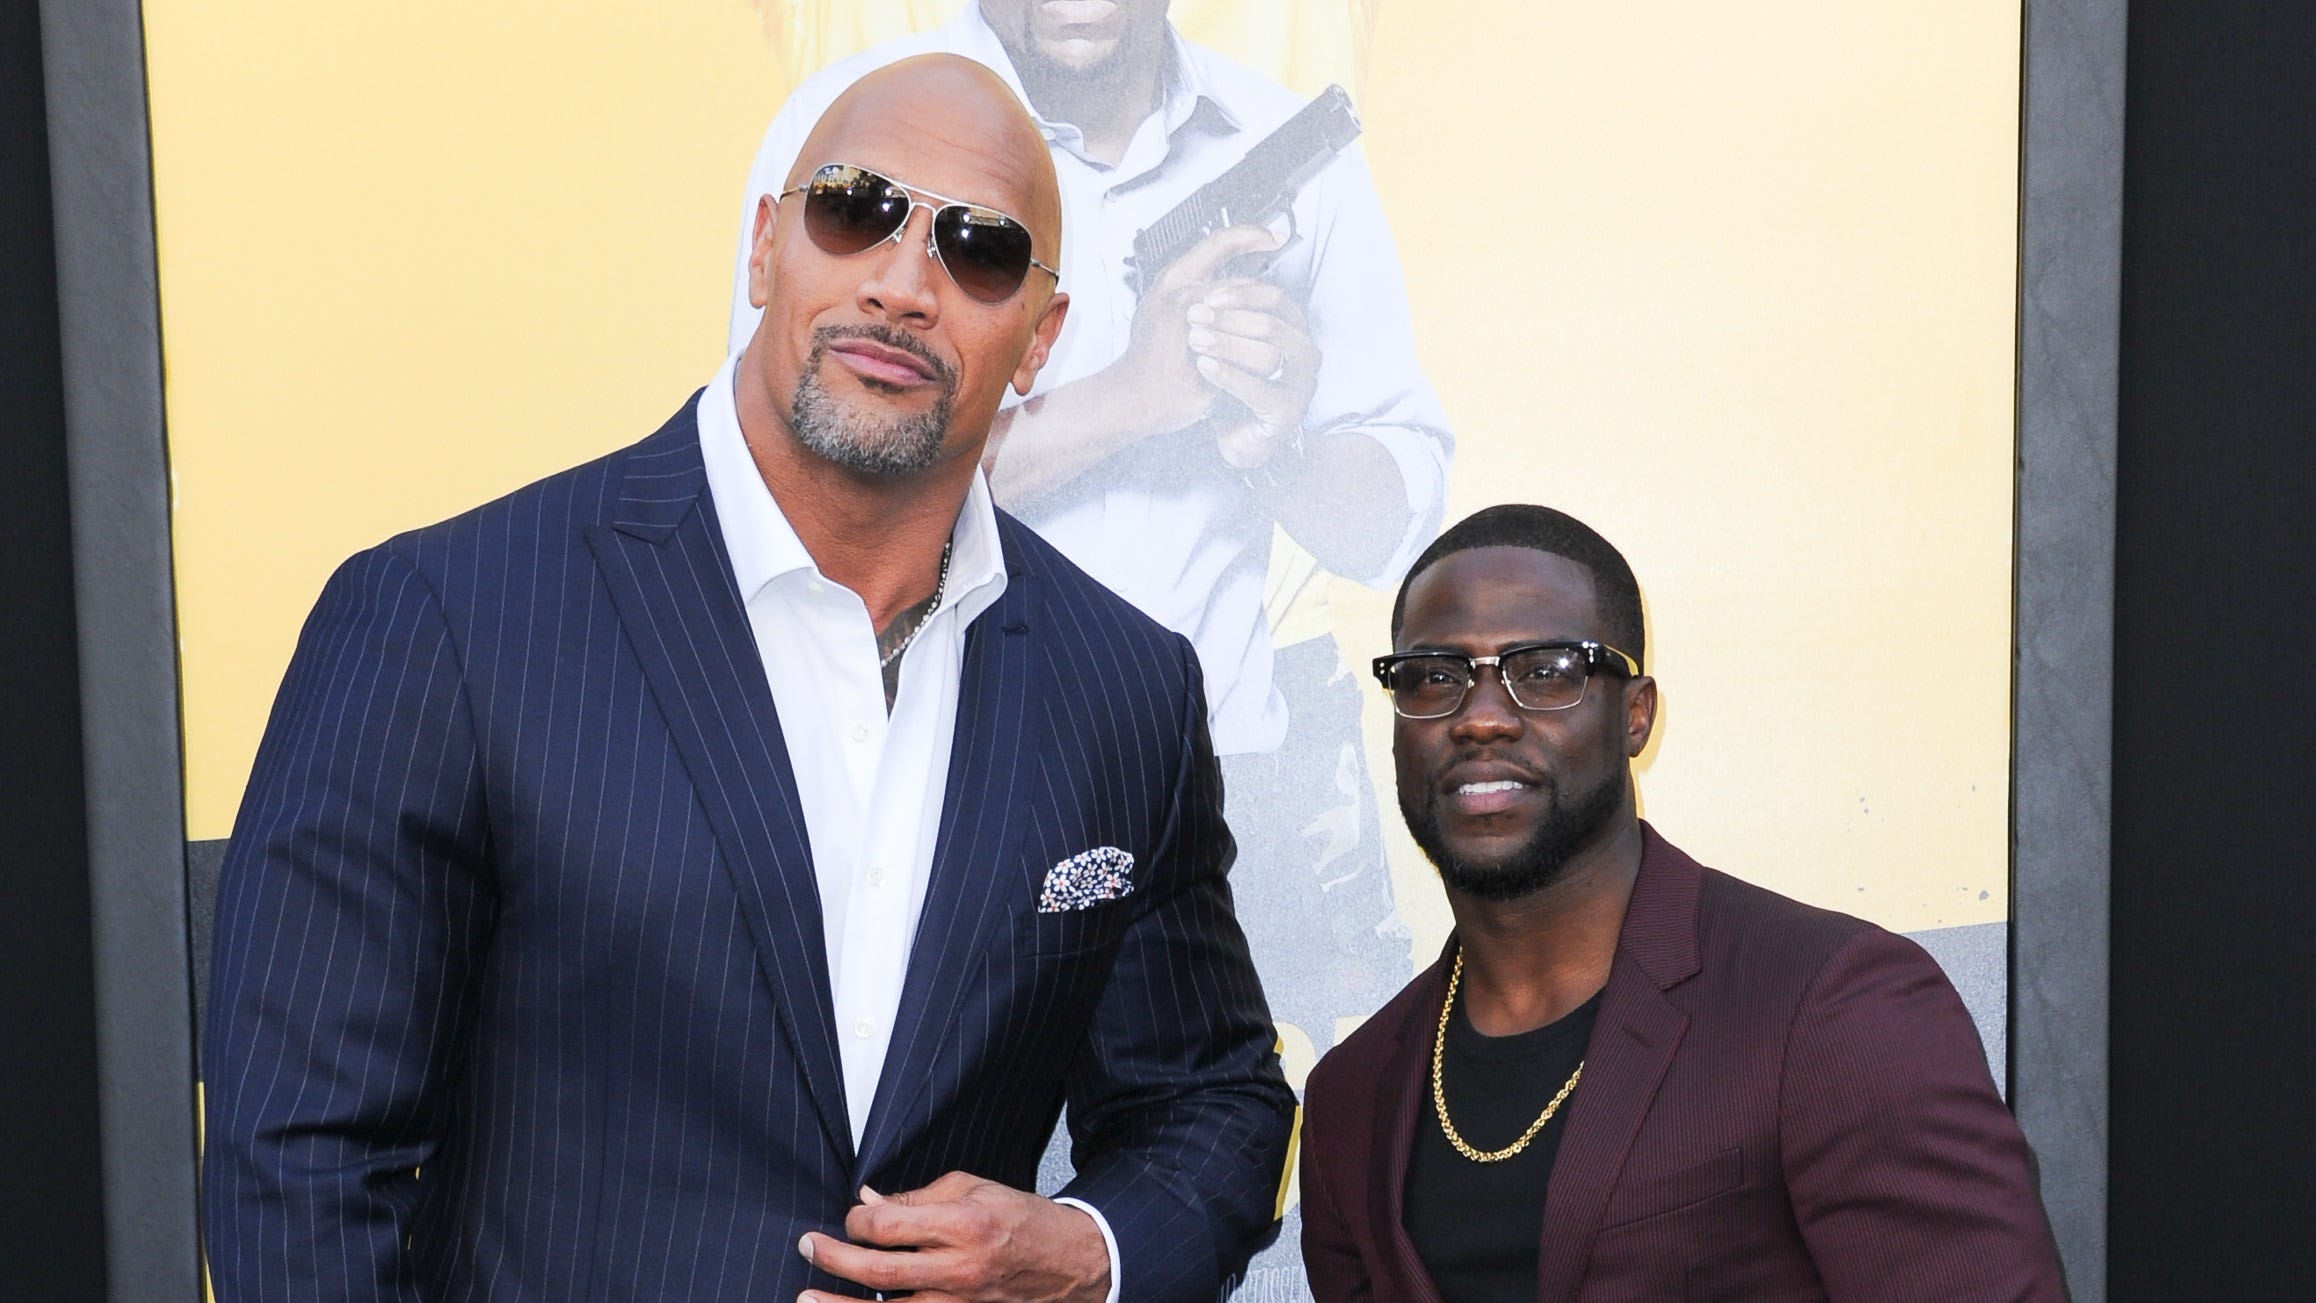 Kevin Hart update: Dwayne The Rock Johnson says 'he's doing very well'